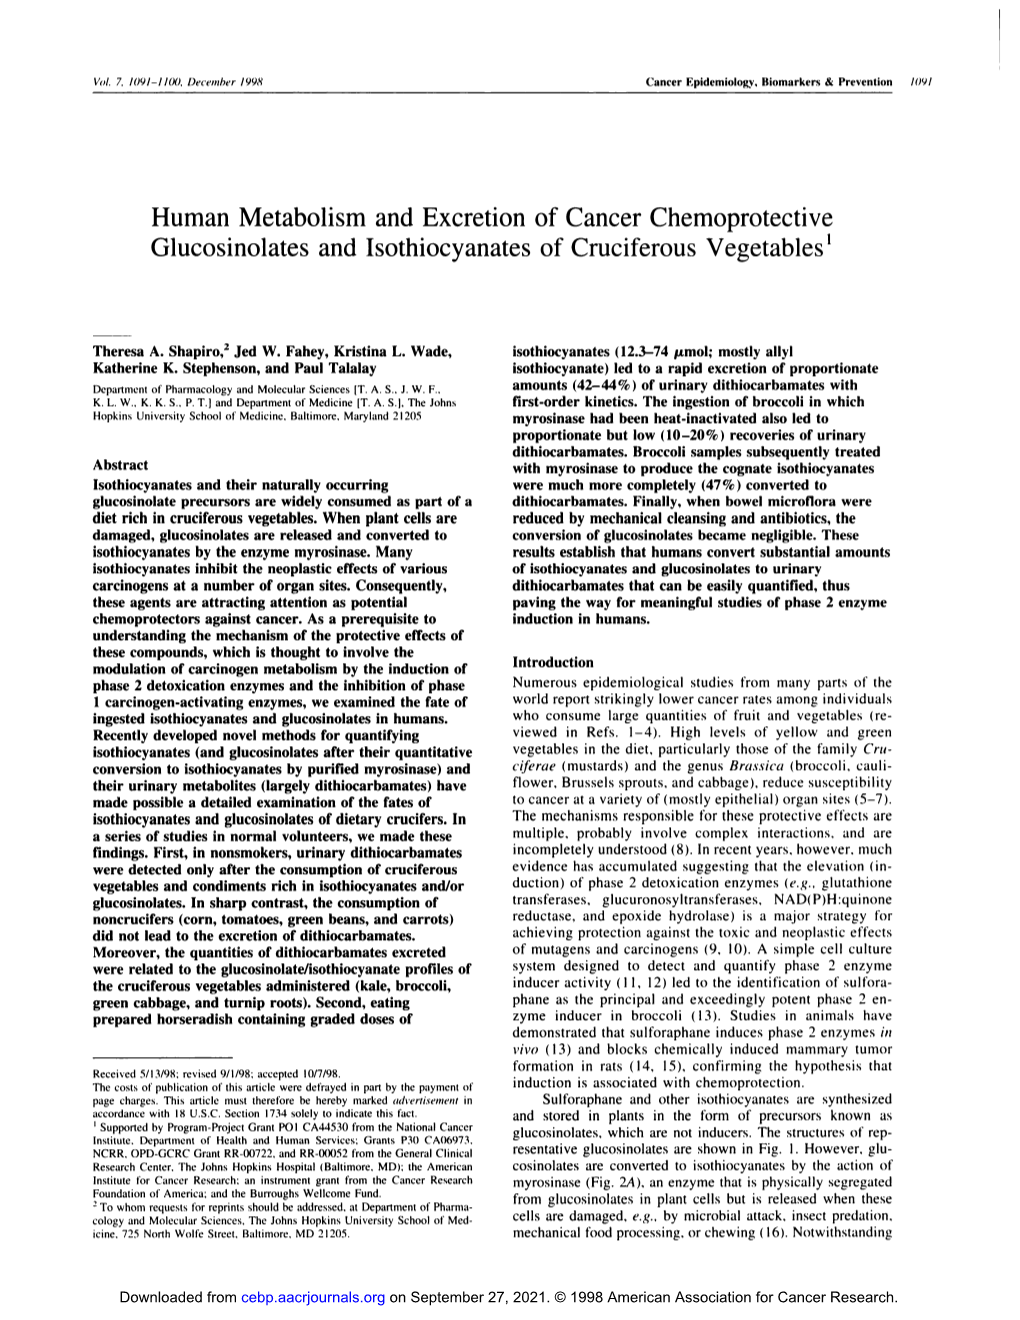 Human Metabolism and Excretion of Cancer Chemoprotective